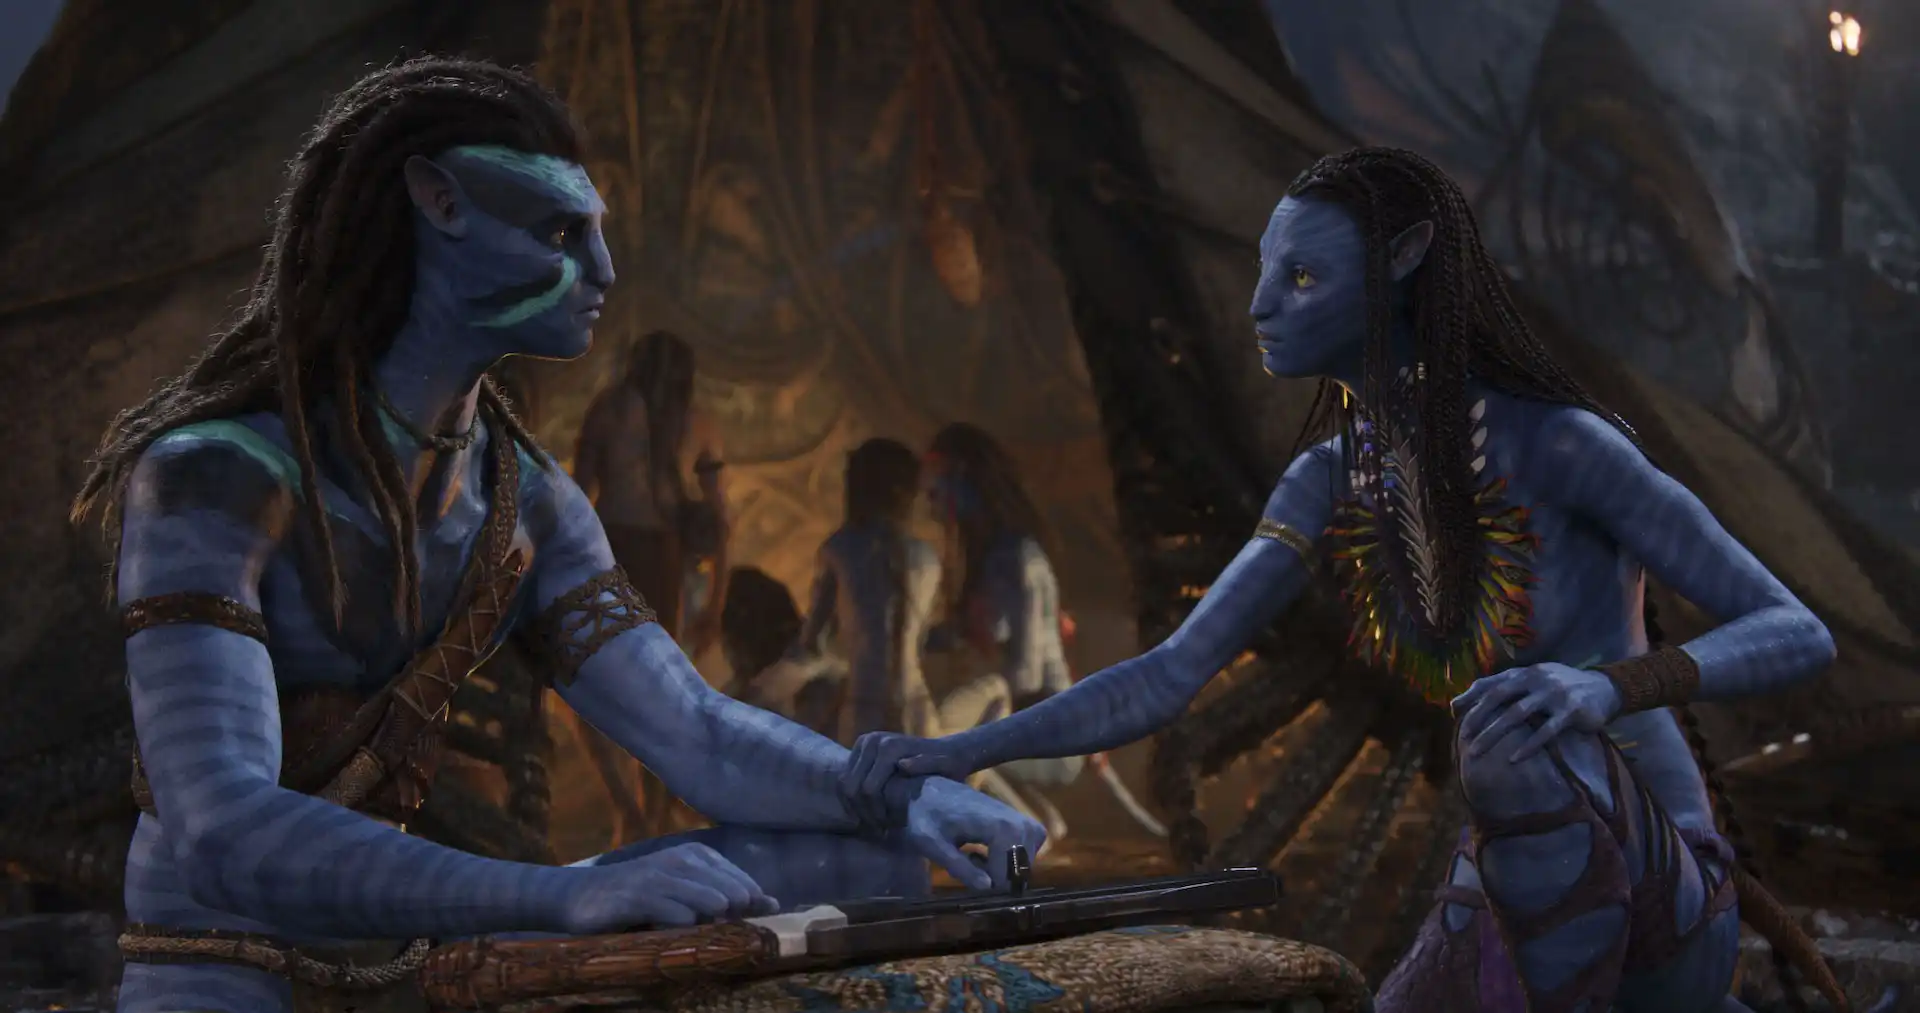 Does Avatar 2 premiere streaming and online on Disney Plus?  Yes